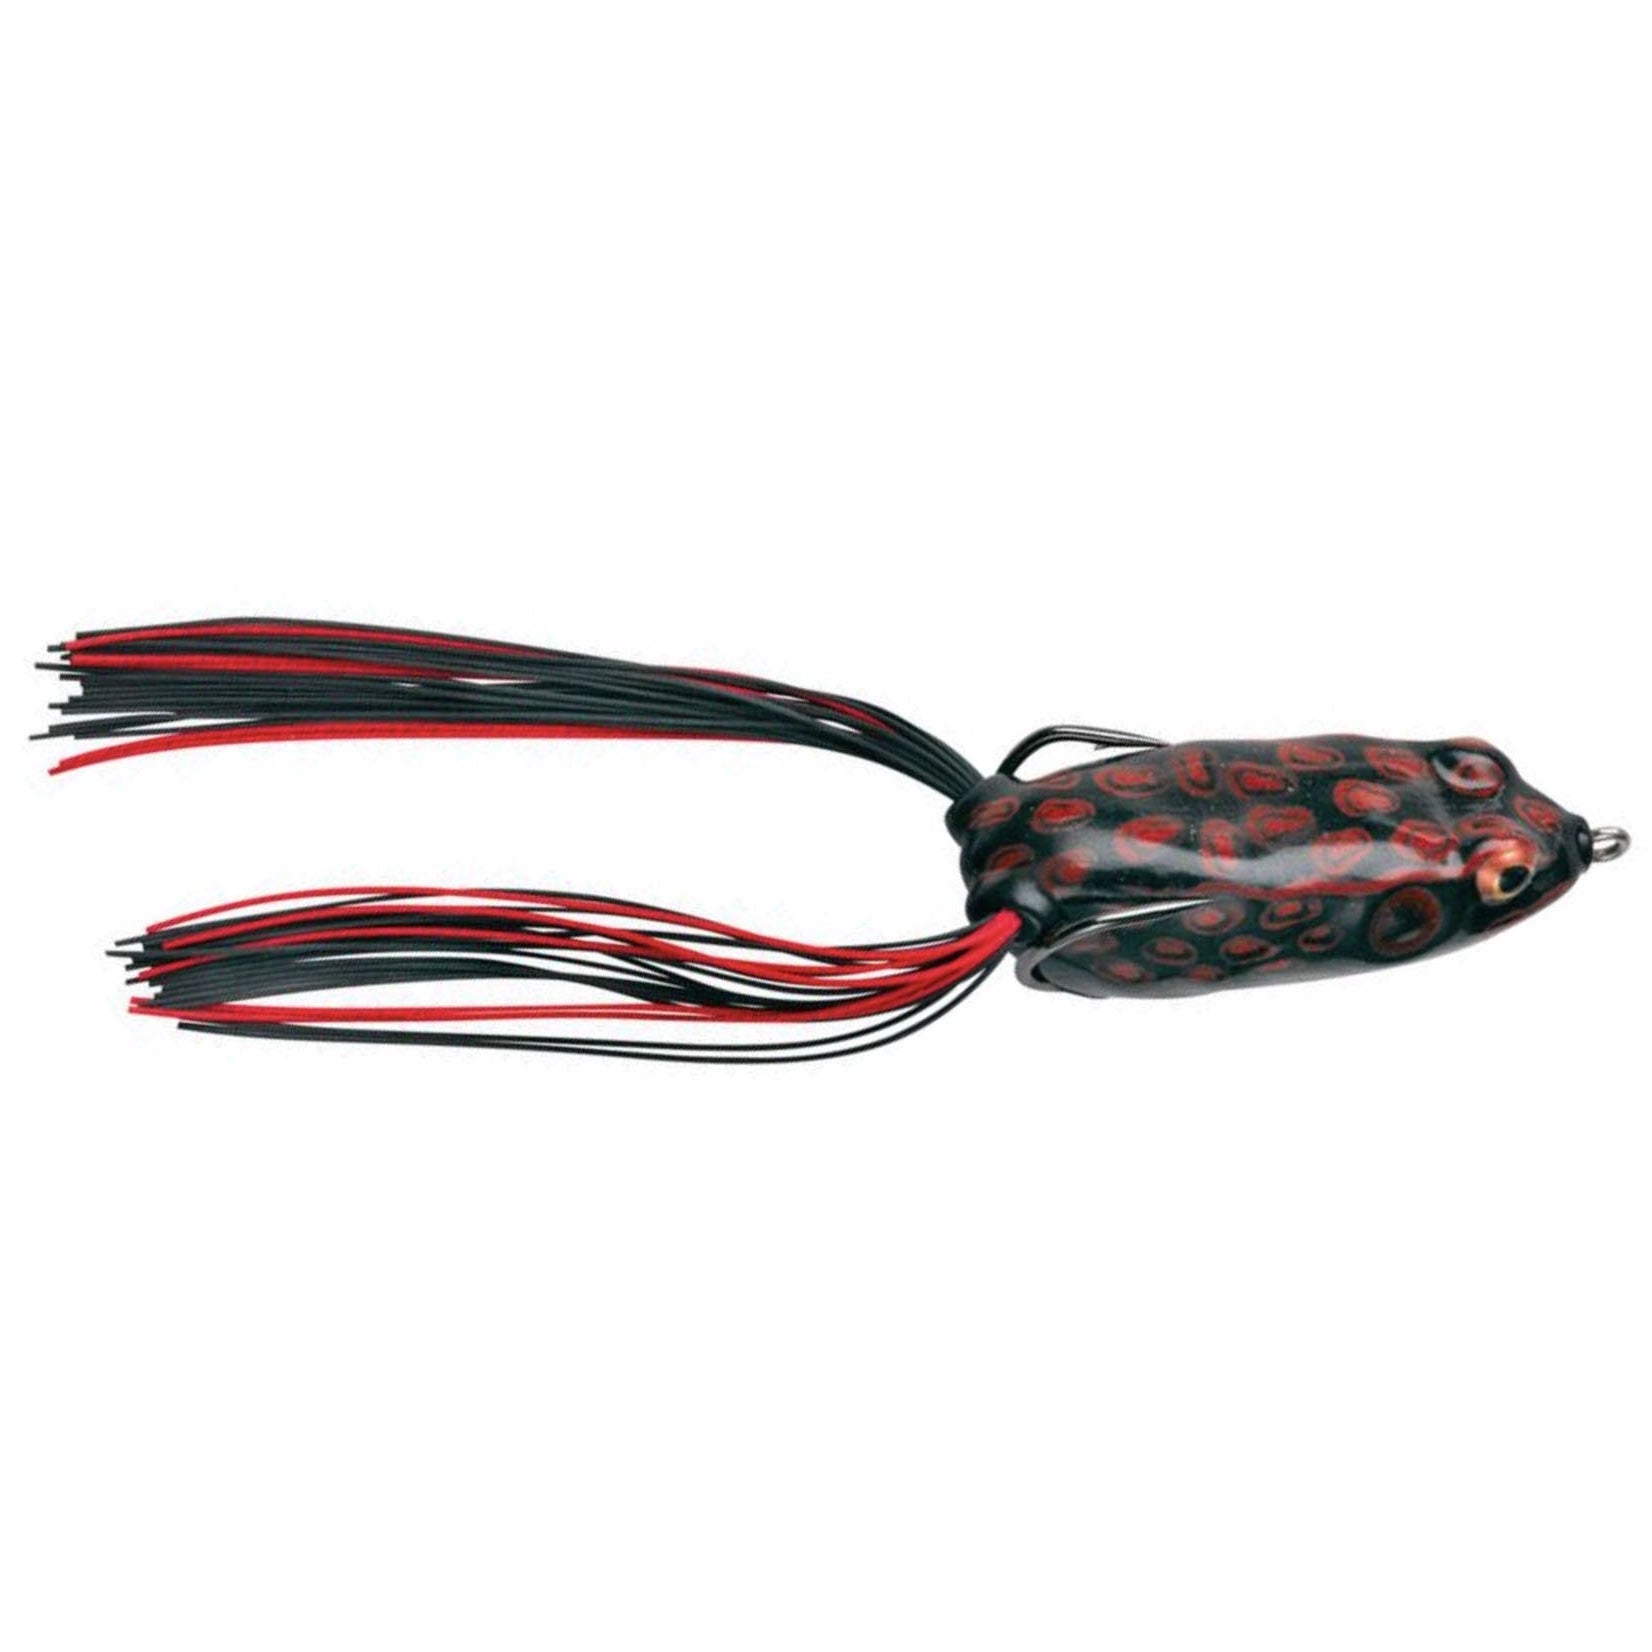 https://cdn.shopify.com/s/files/1/0019/7895/7881/products/booyah-pad-crasher-frog-booyah-softbaits-frog_toad-hollowbody_frog-kuro-frog-2-12-5_084609a0-57c1-4d2e-a765-9d9e6c5f349d.jpg?v=1642026519